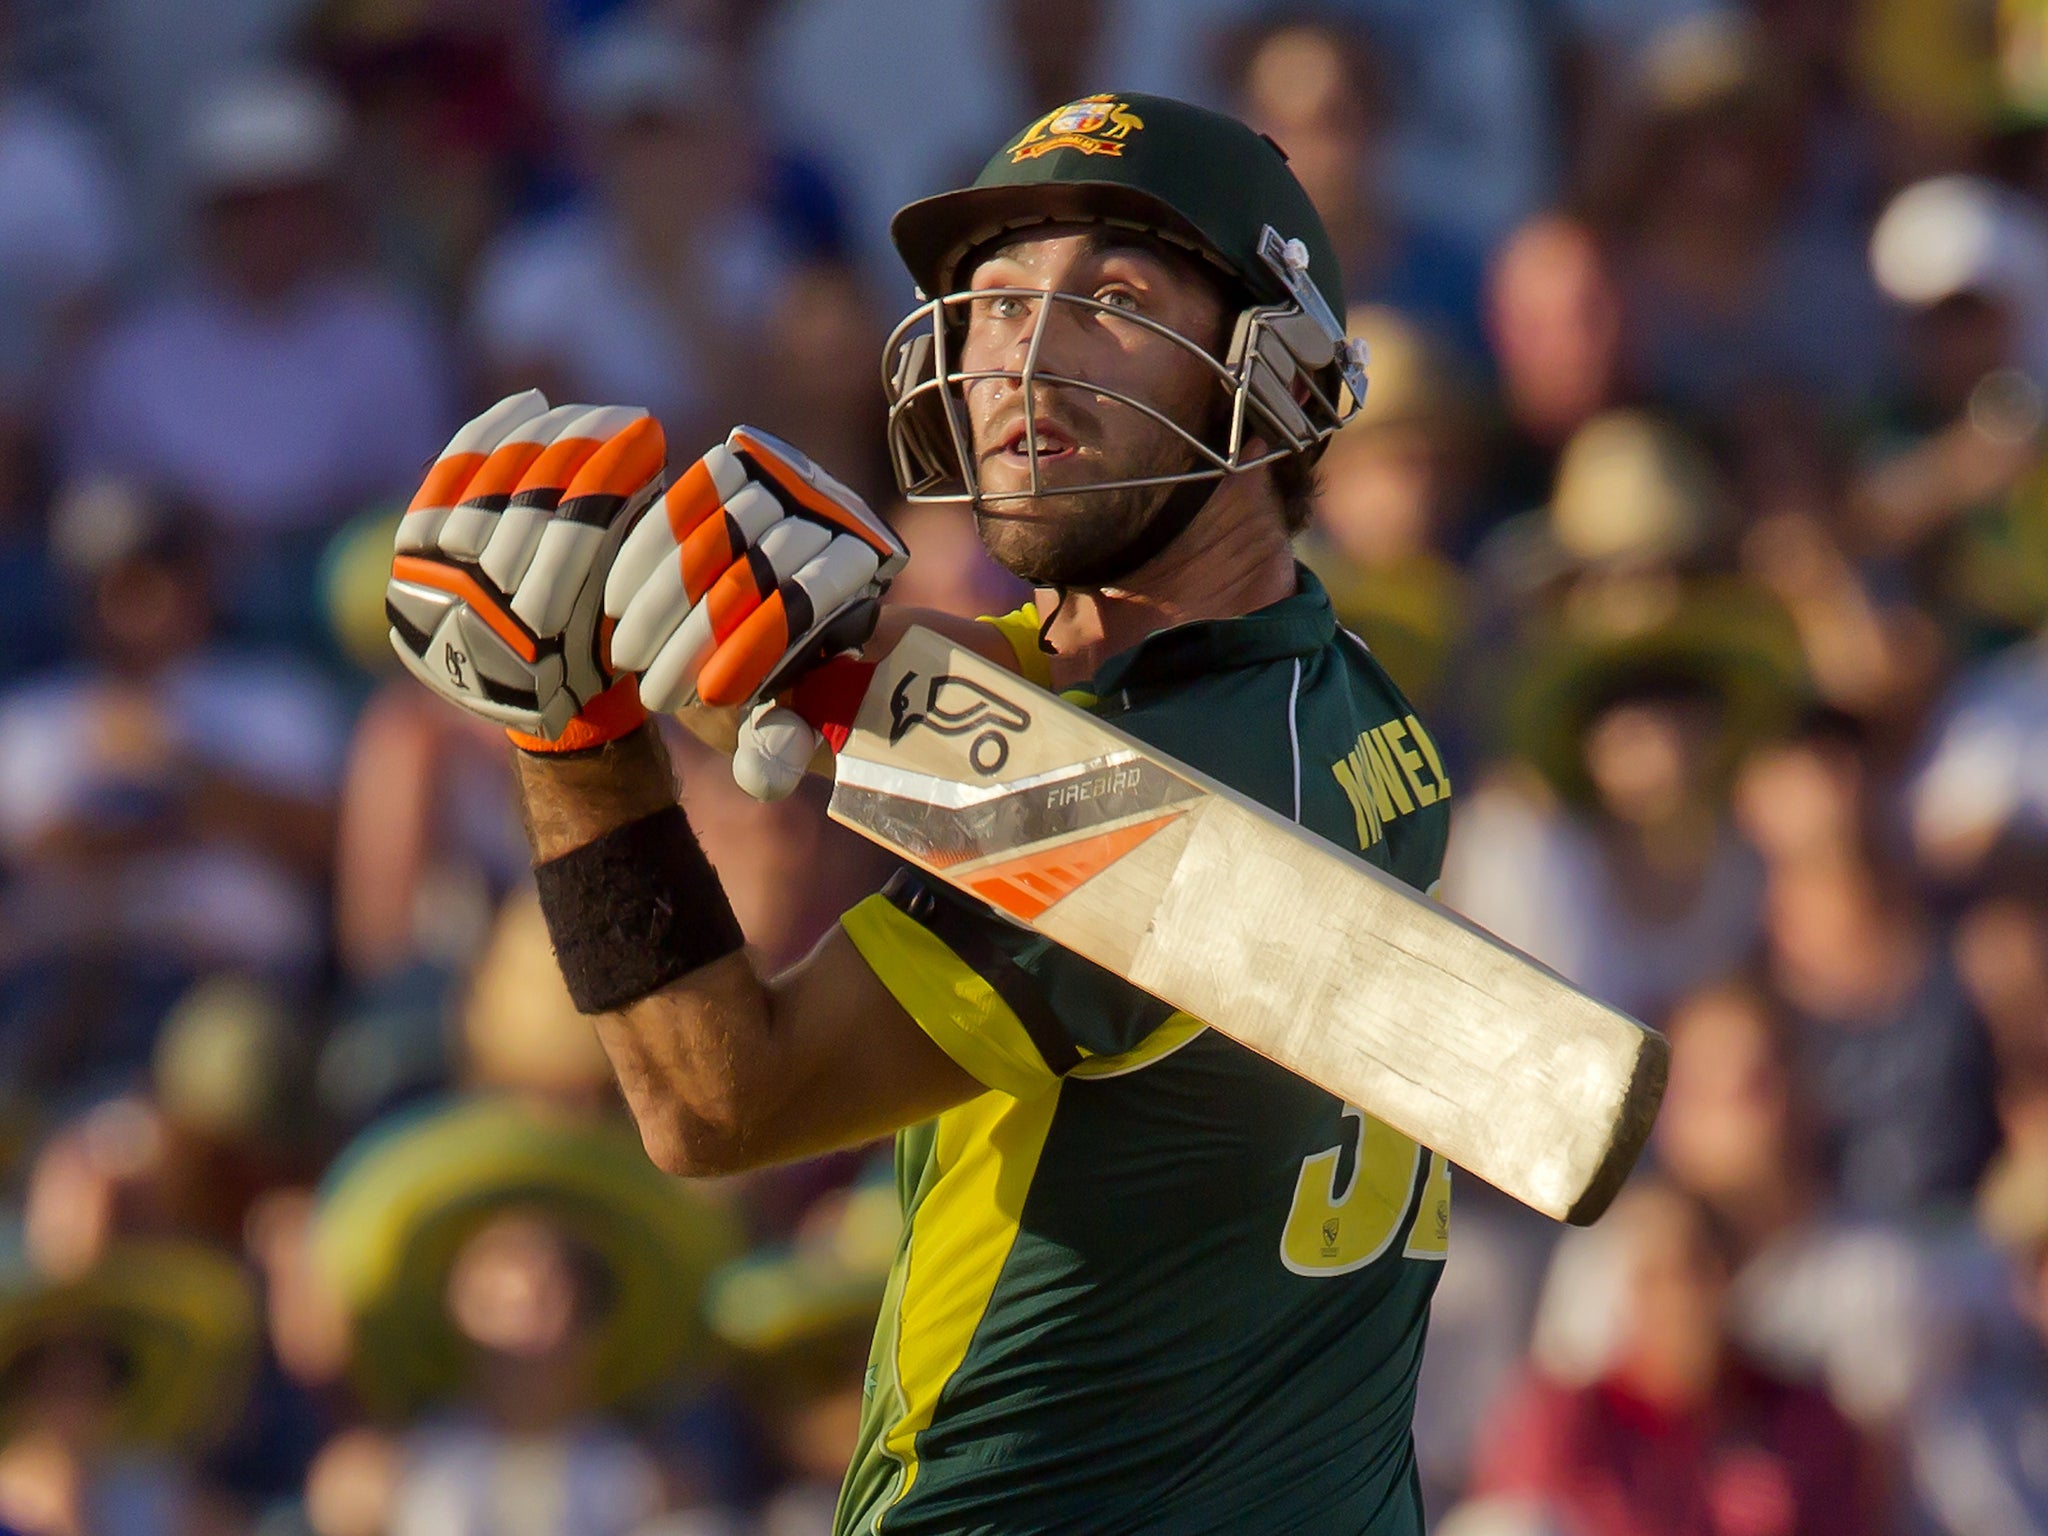 Glenn Maxwell has been singled out for criticism by Darren Lehmann